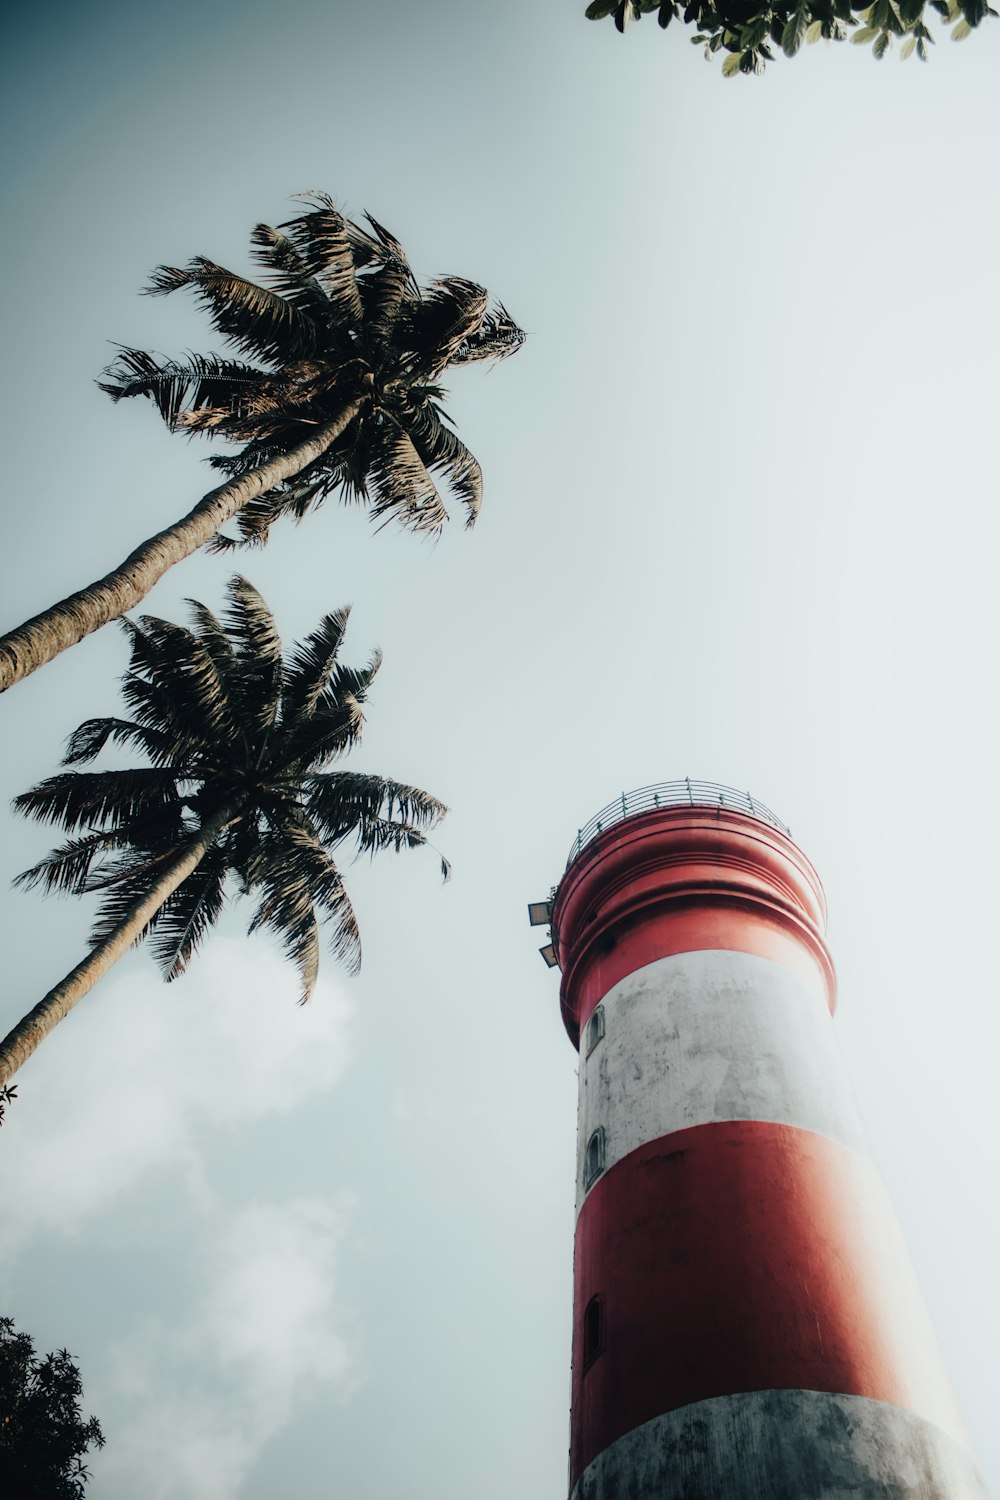 a red and white lighthouse with palm trees in the background